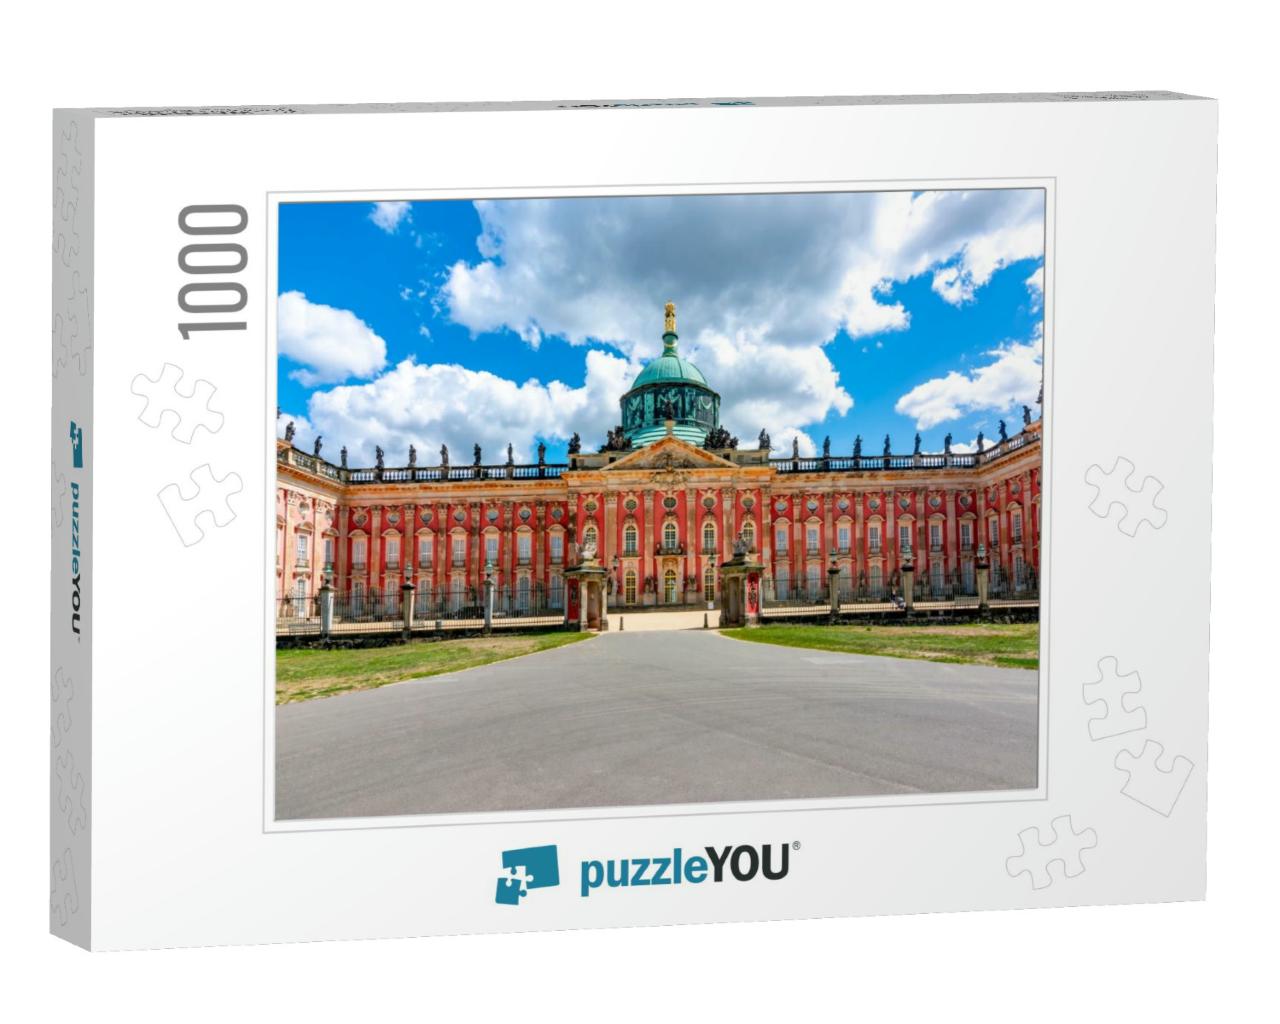 New Palace Neues Palais Facade in Potsdam, Germany... Jigsaw Puzzle with 1000 pieces